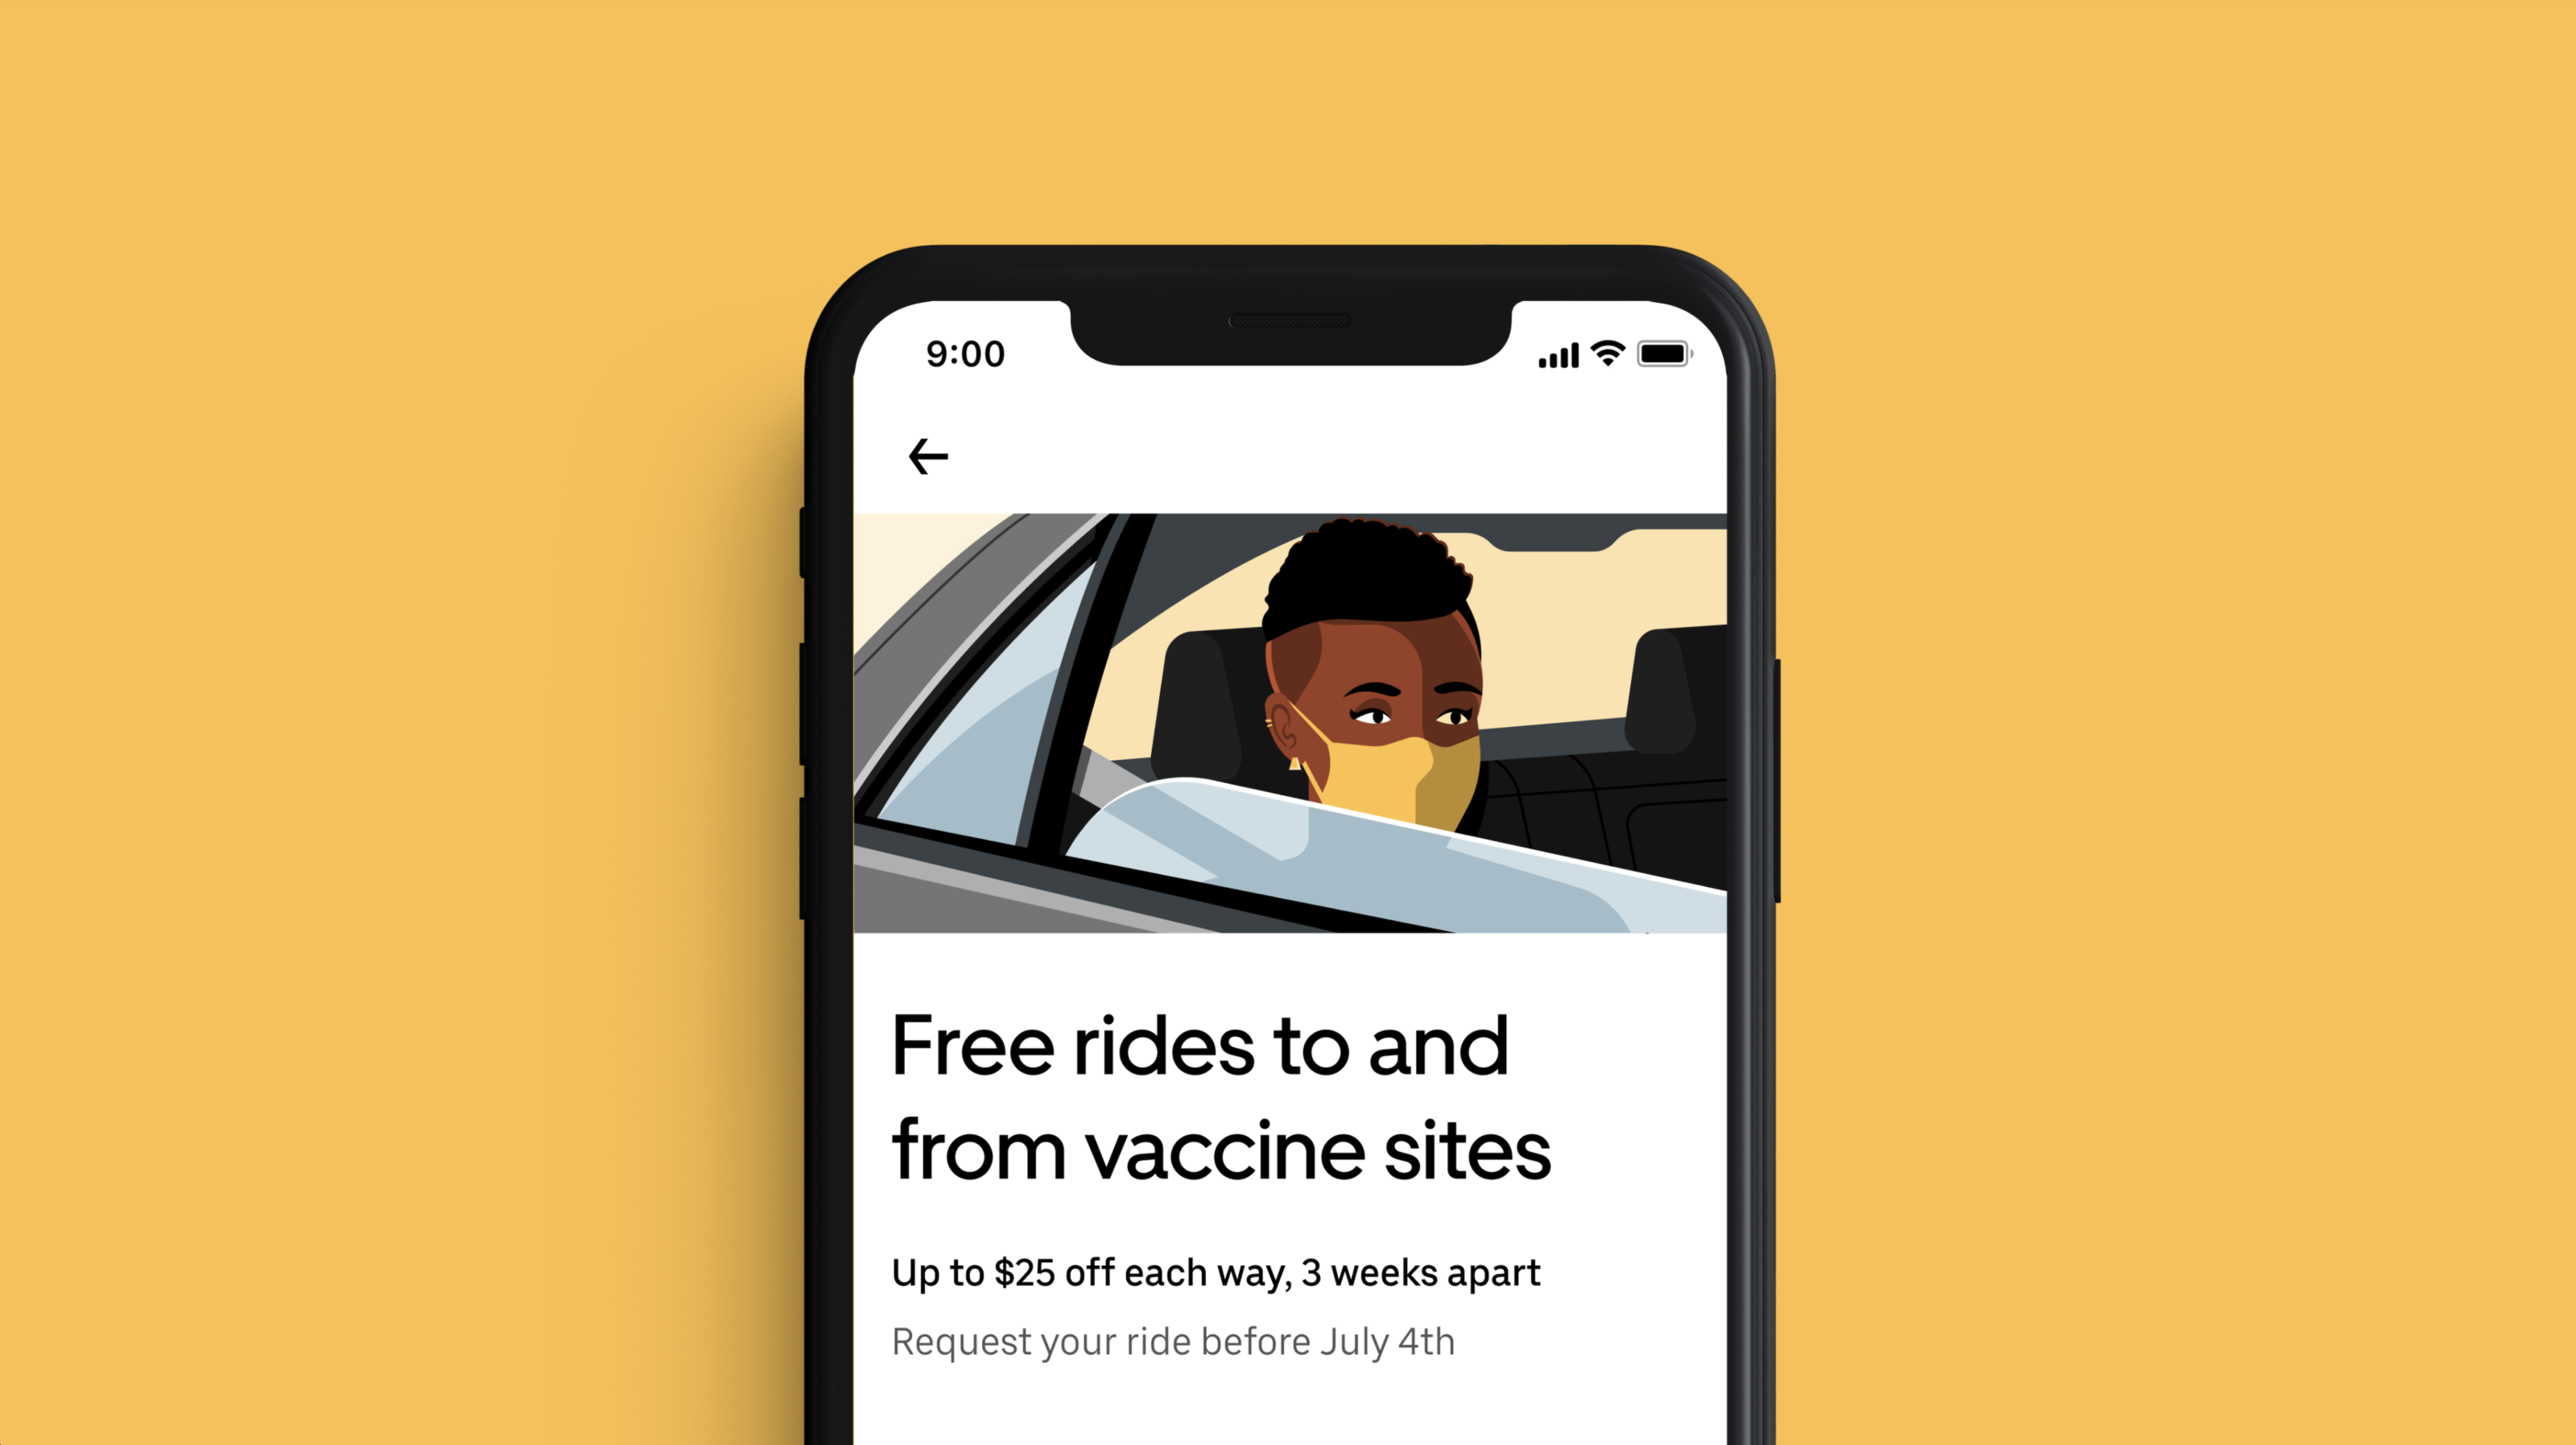 Uber notification displayed on iPhone: “Free rides to and from vaccine sites.”